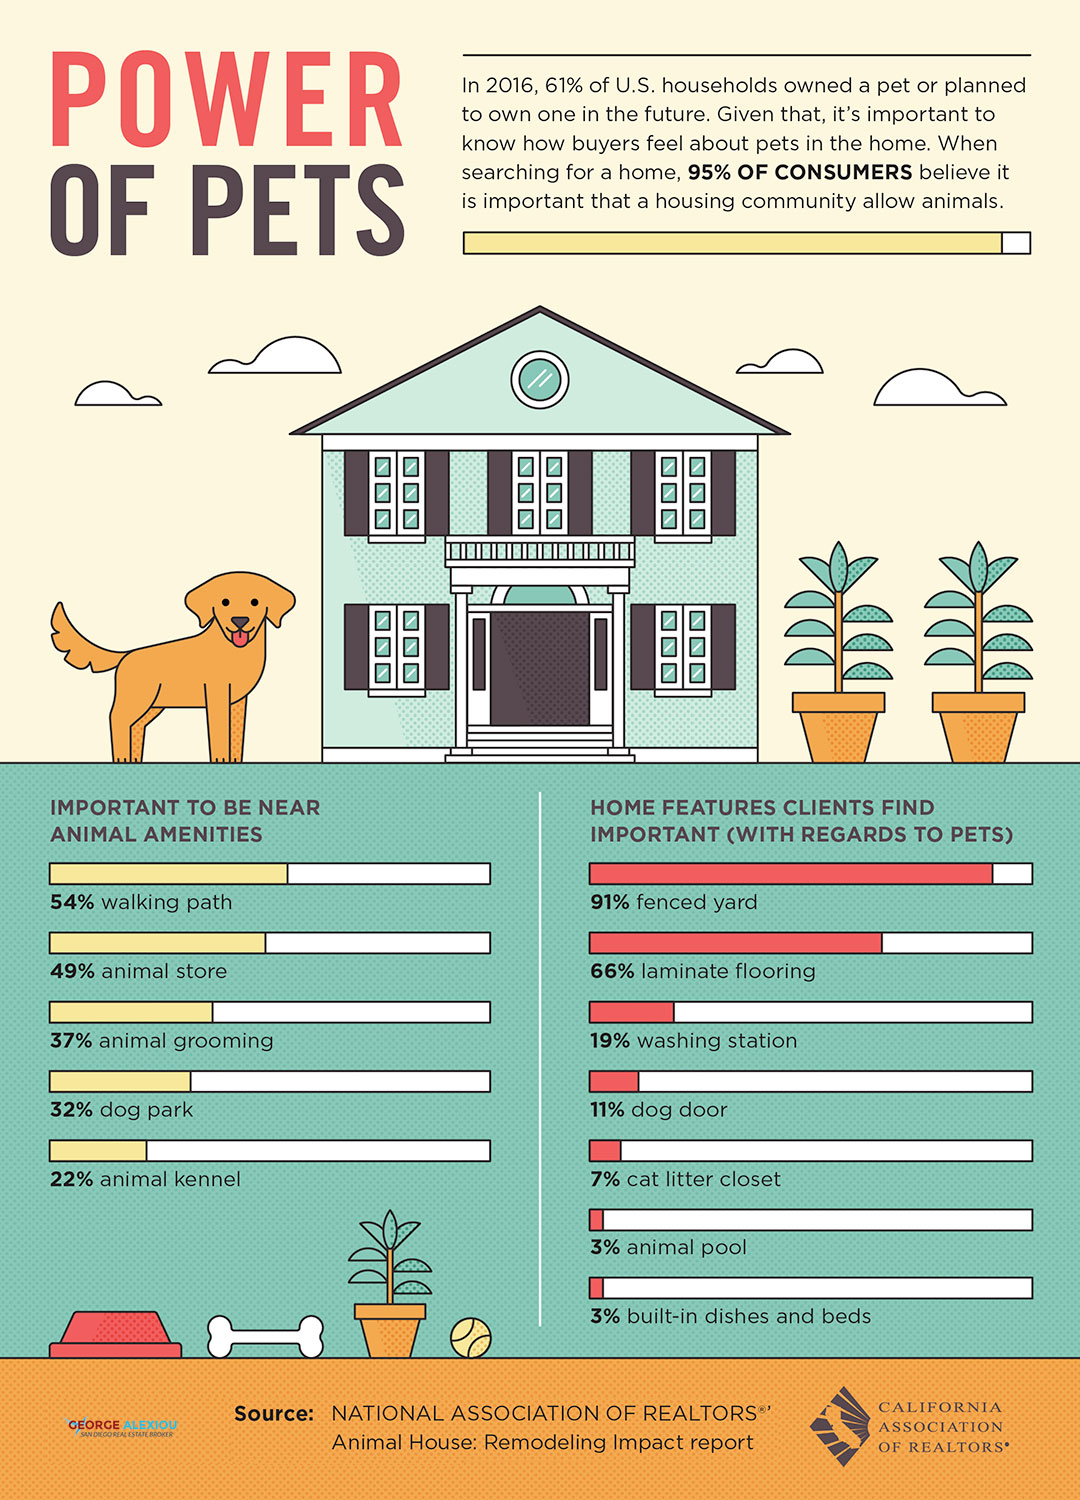 How Buyers Feel About Pets in Home [Infographic]